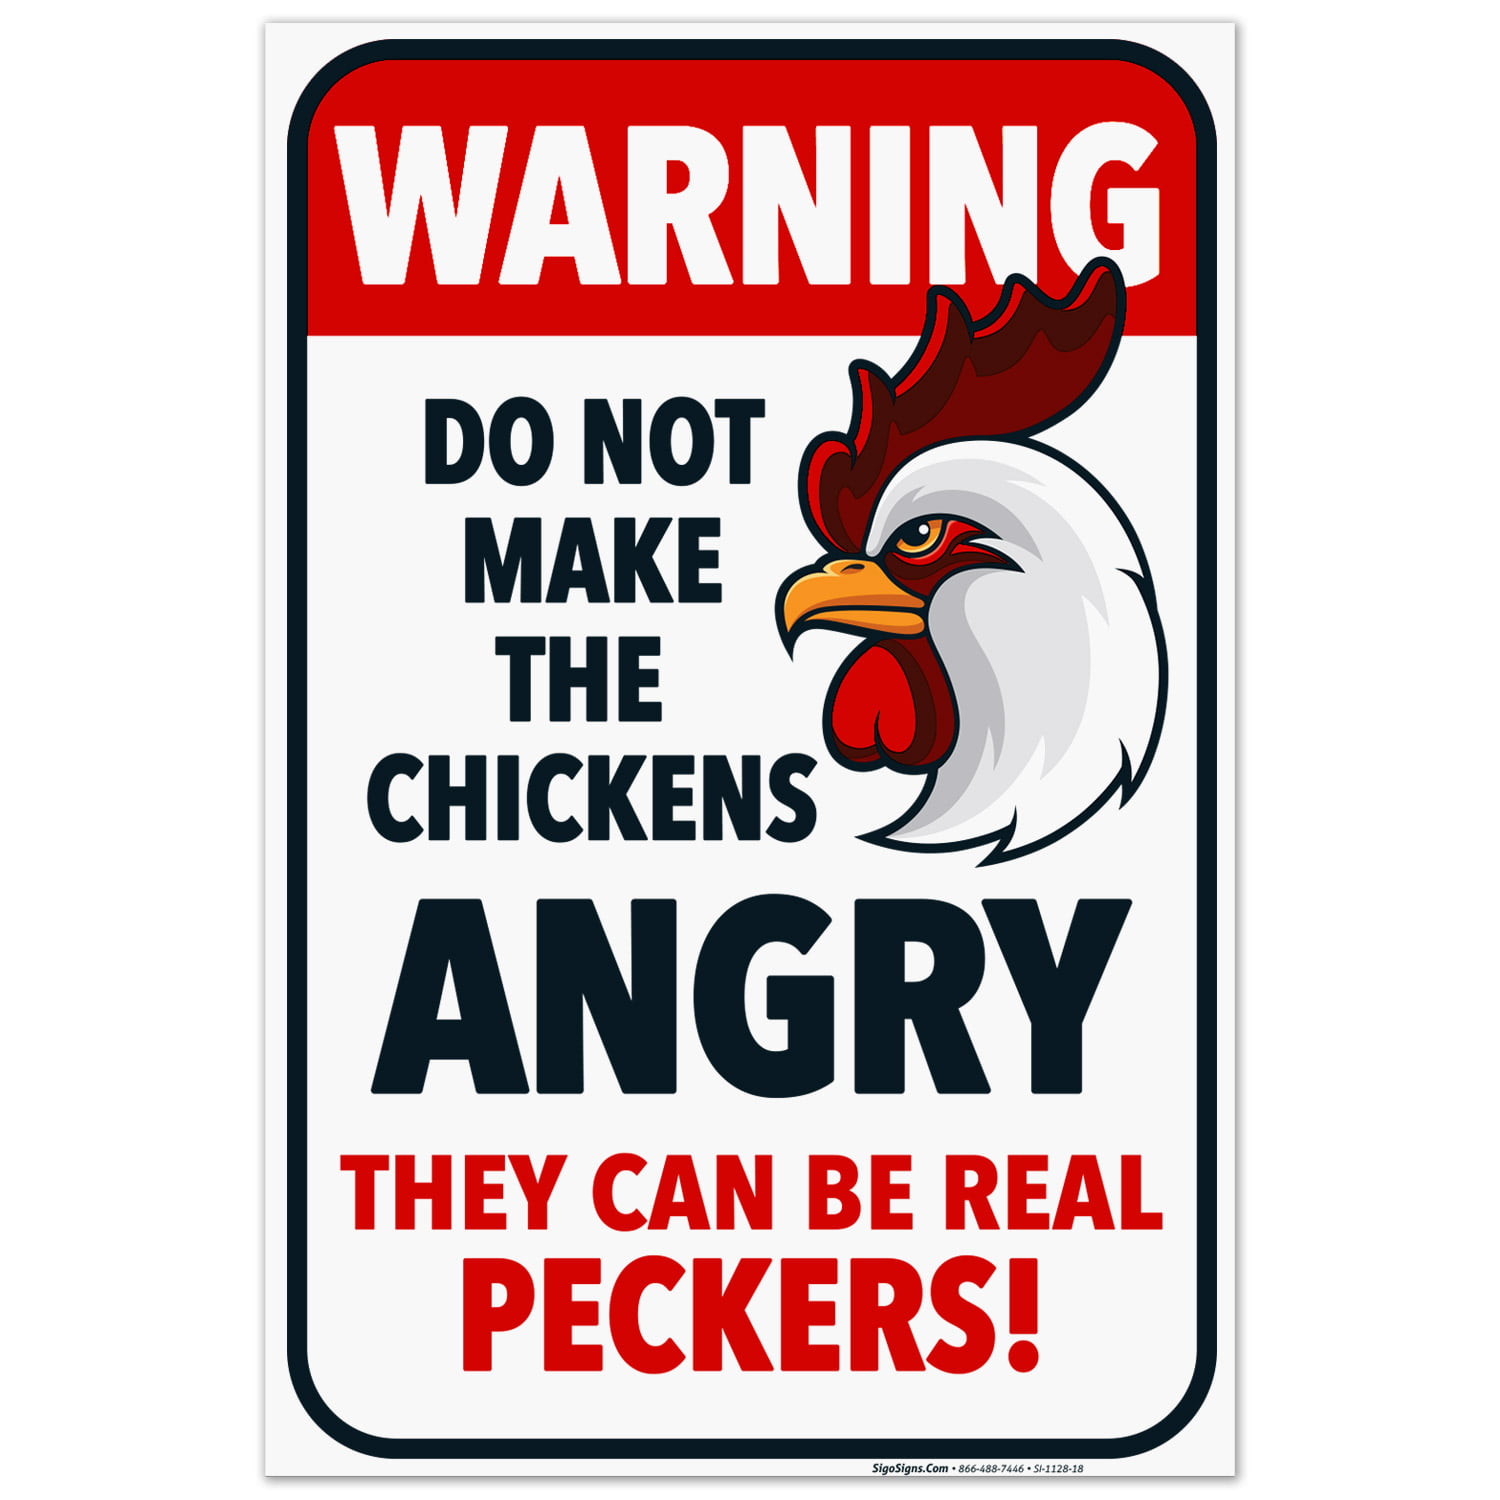 8 x 12 Chicken Coop Sign Warning Do Not Make Chickens Angry Durable Metal Sign Makes a Funny Chicken Farm Decor Under $20 Use Indoor/Outdoor 